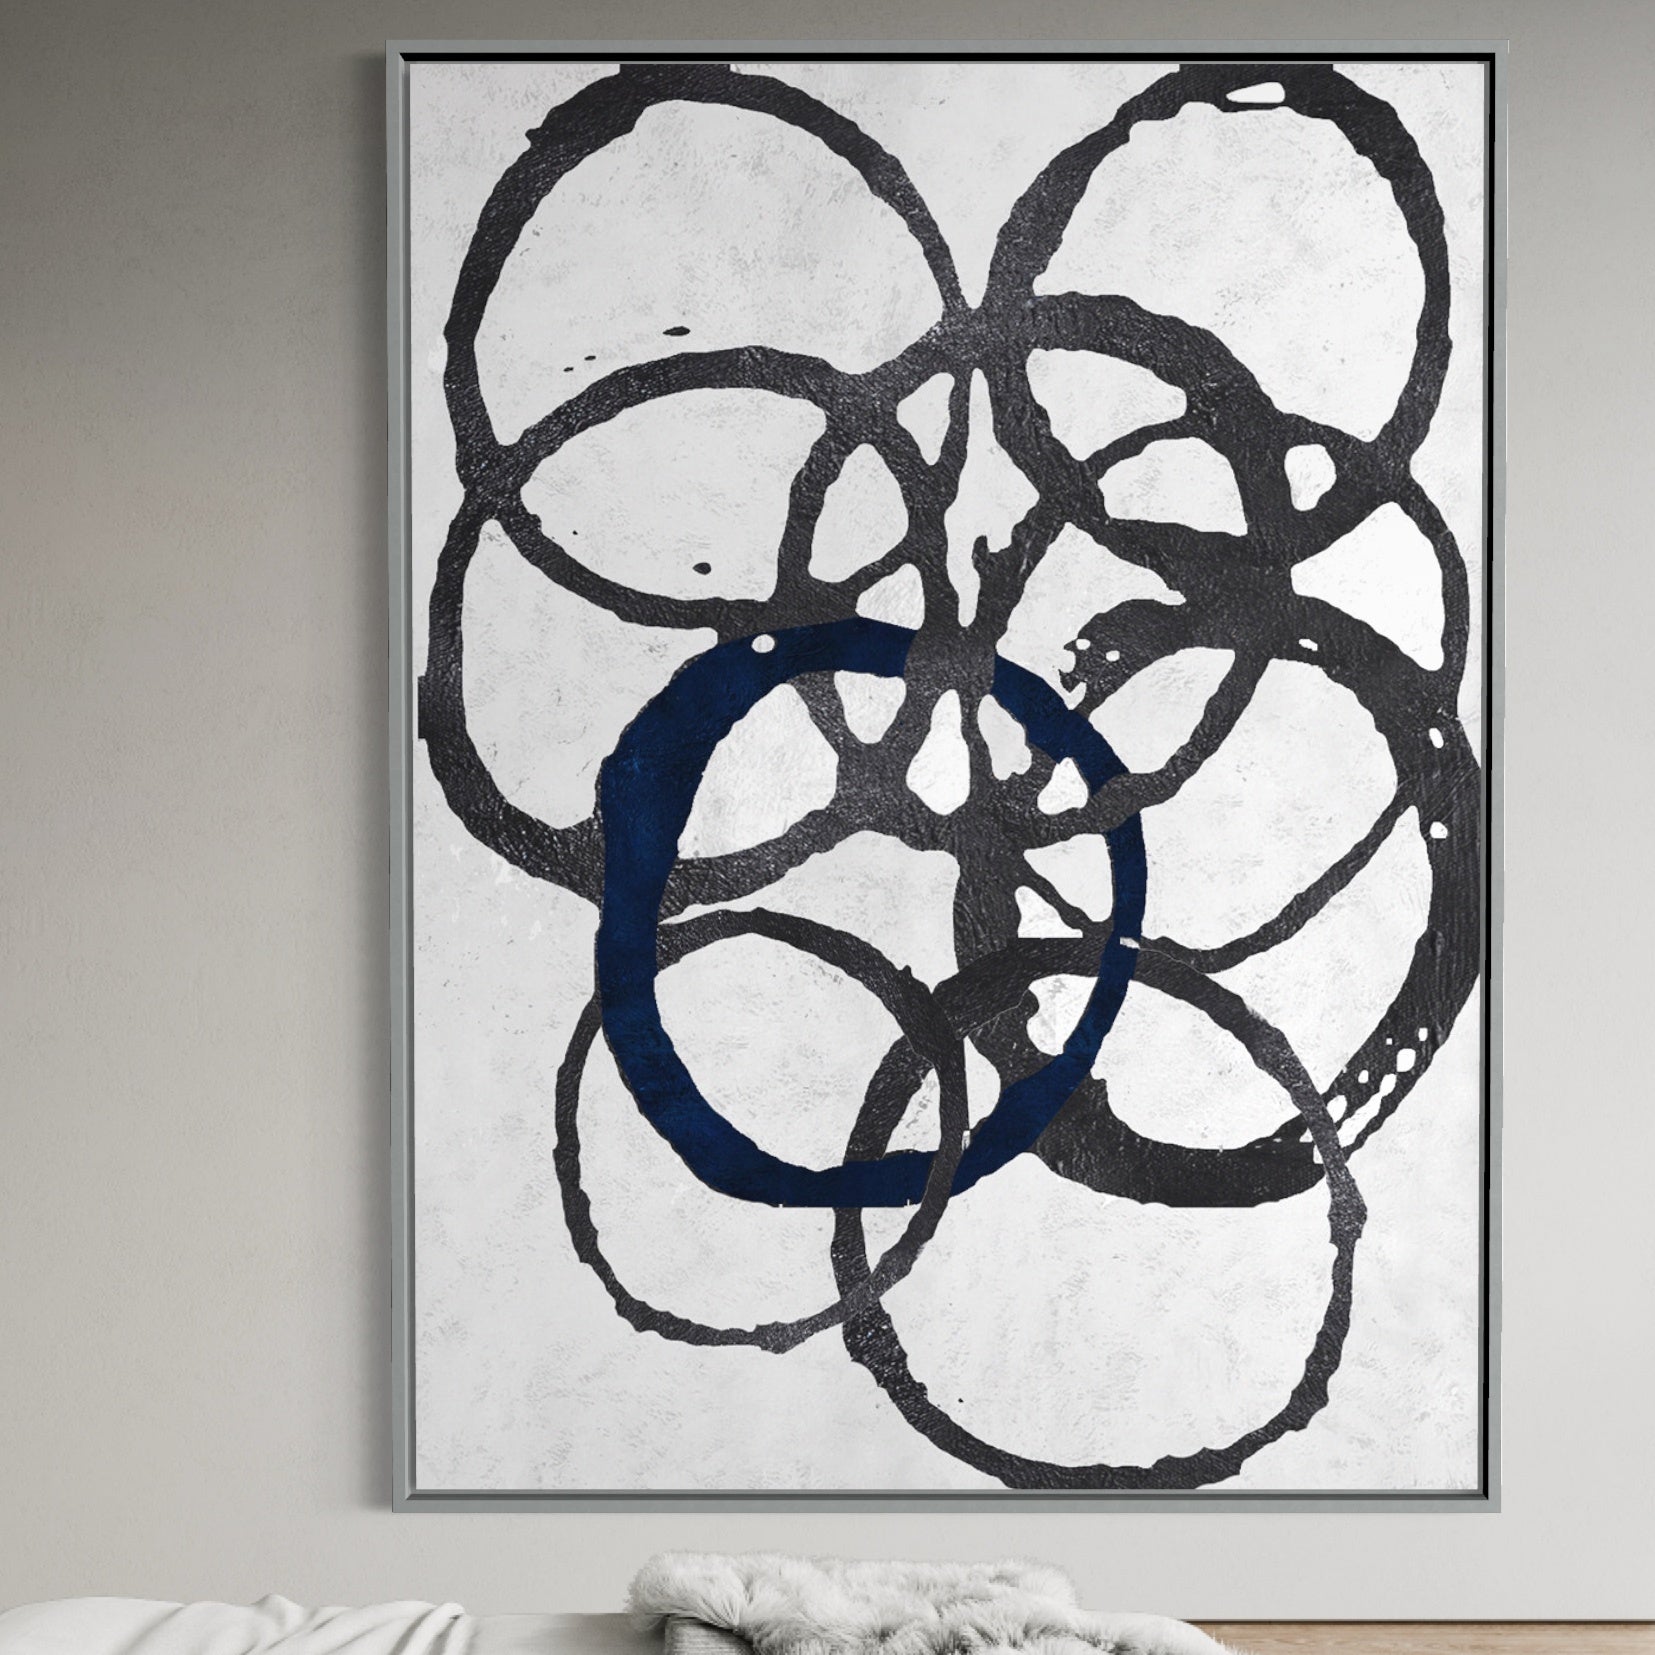 Circles And Charcoal, Wood (Birch) / 90x120cm